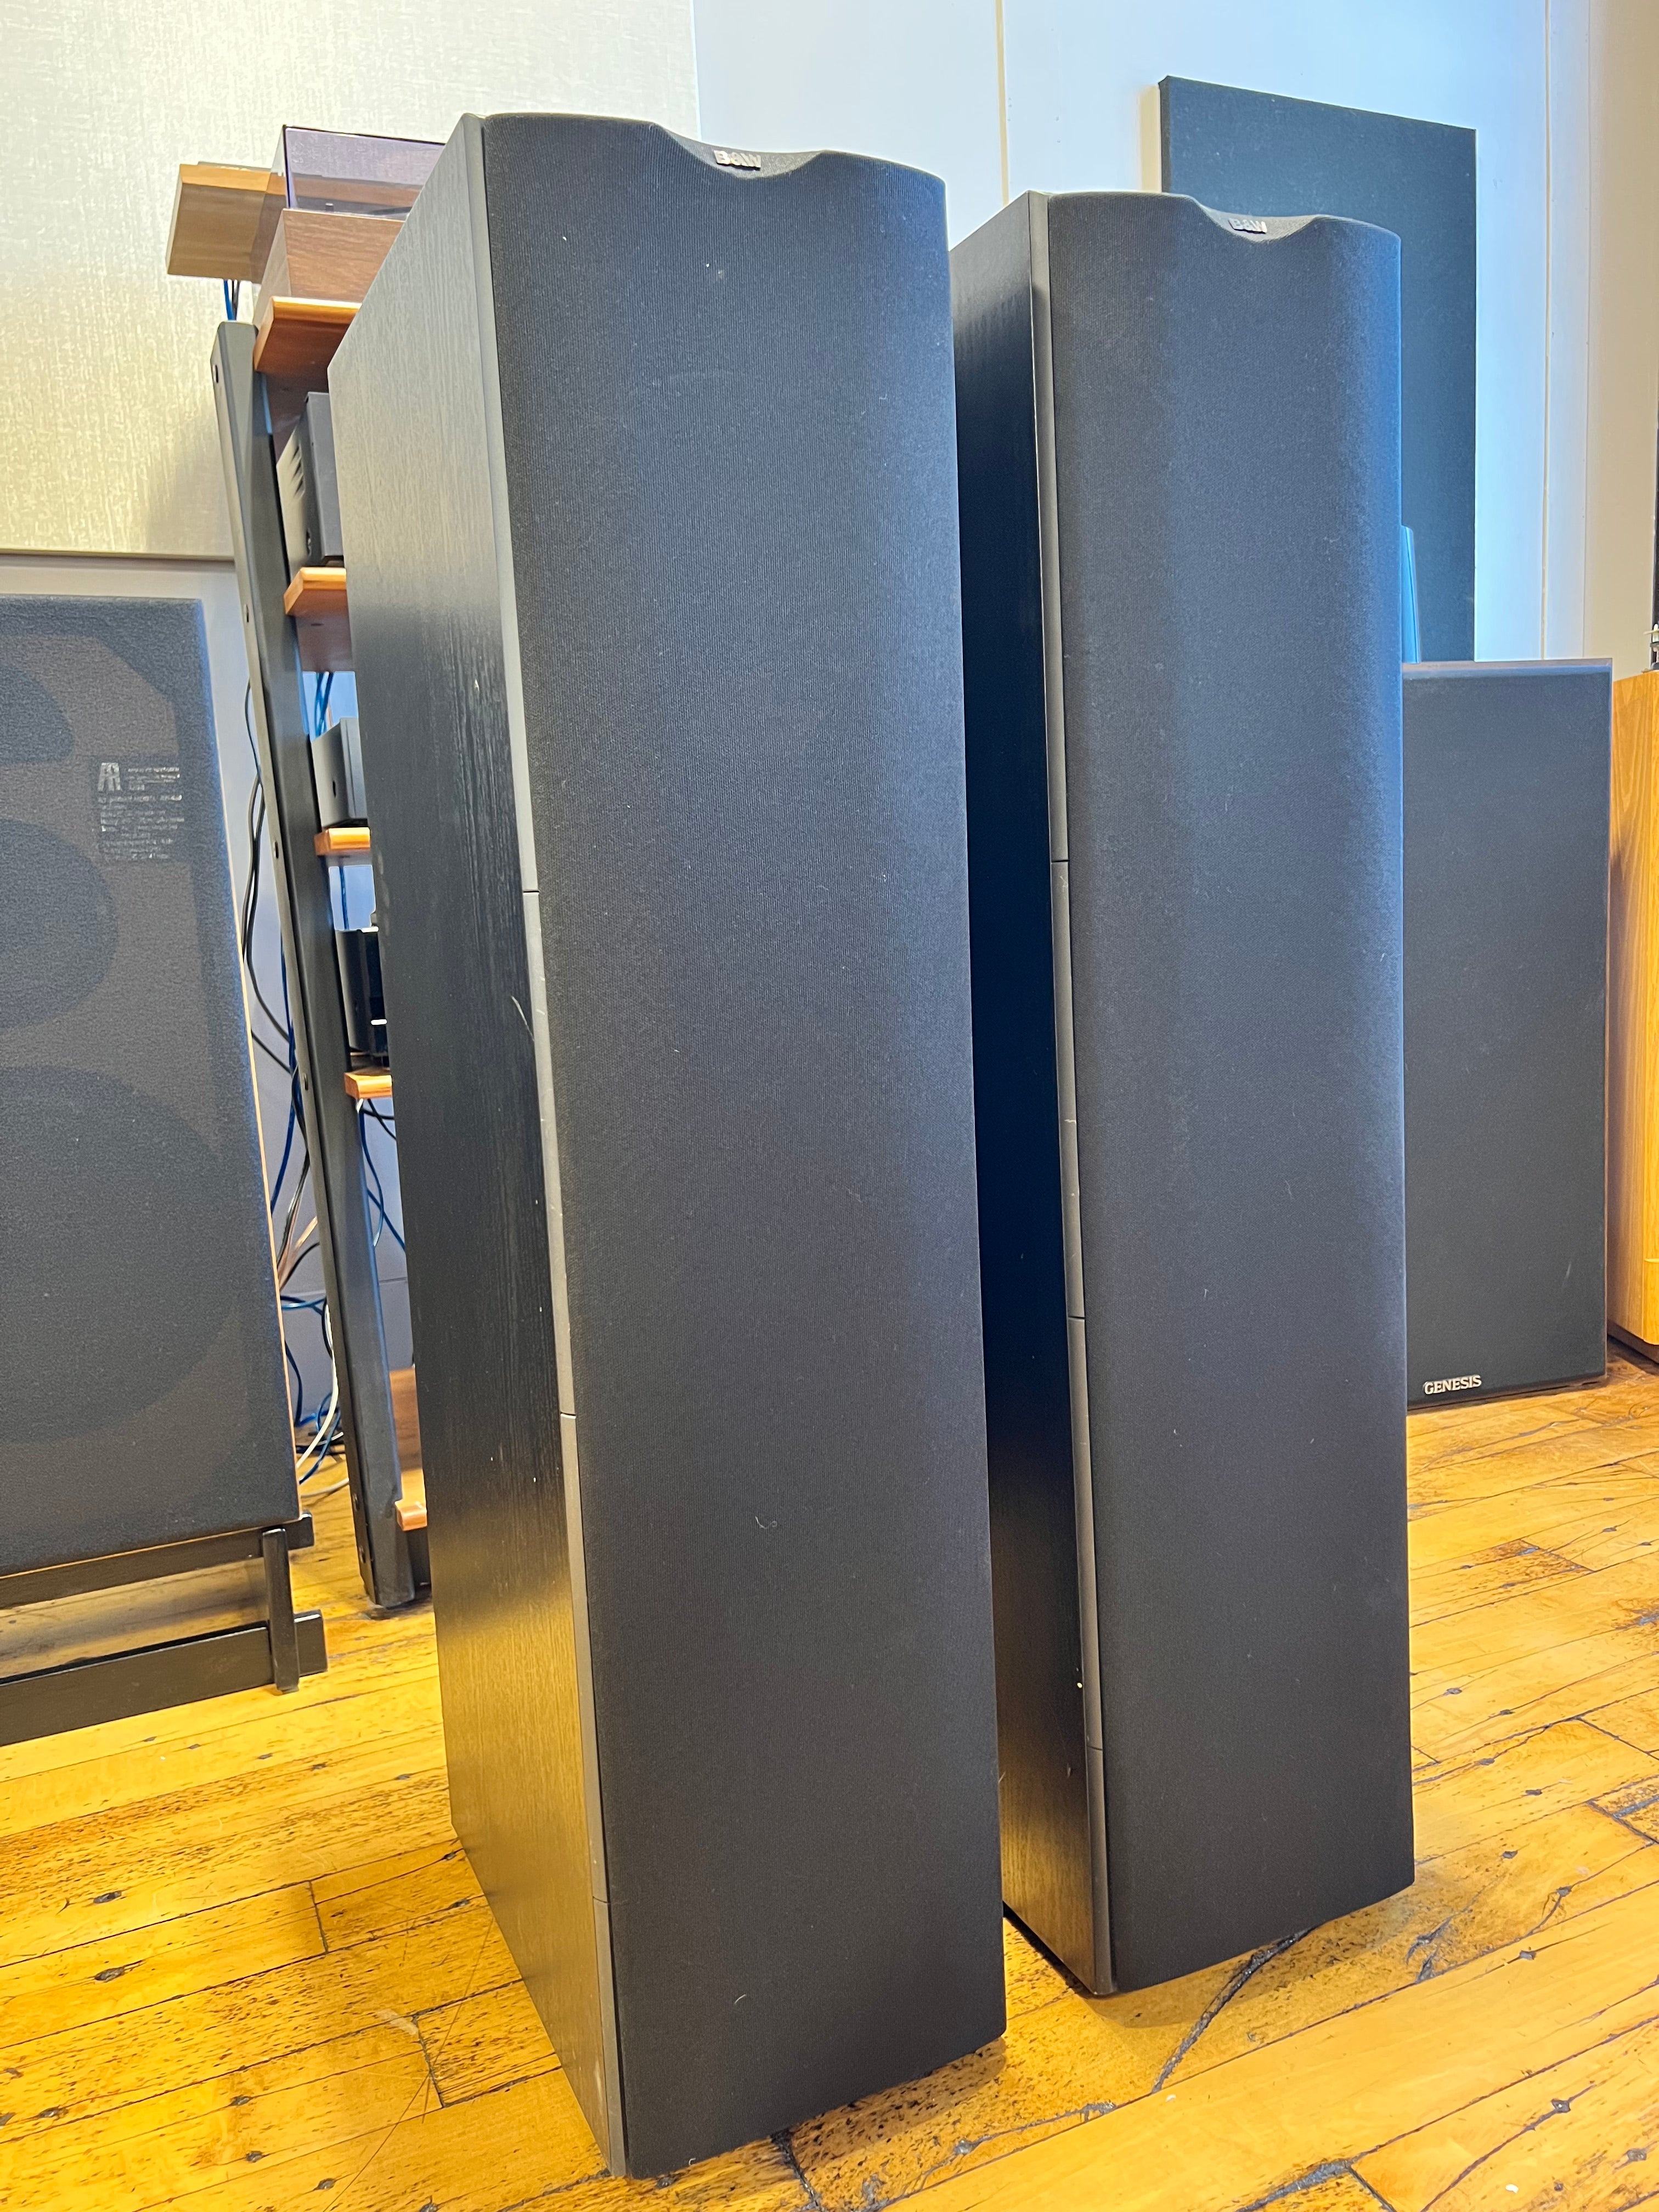 B&W DM604 S2 Tower Speakers - SOLD